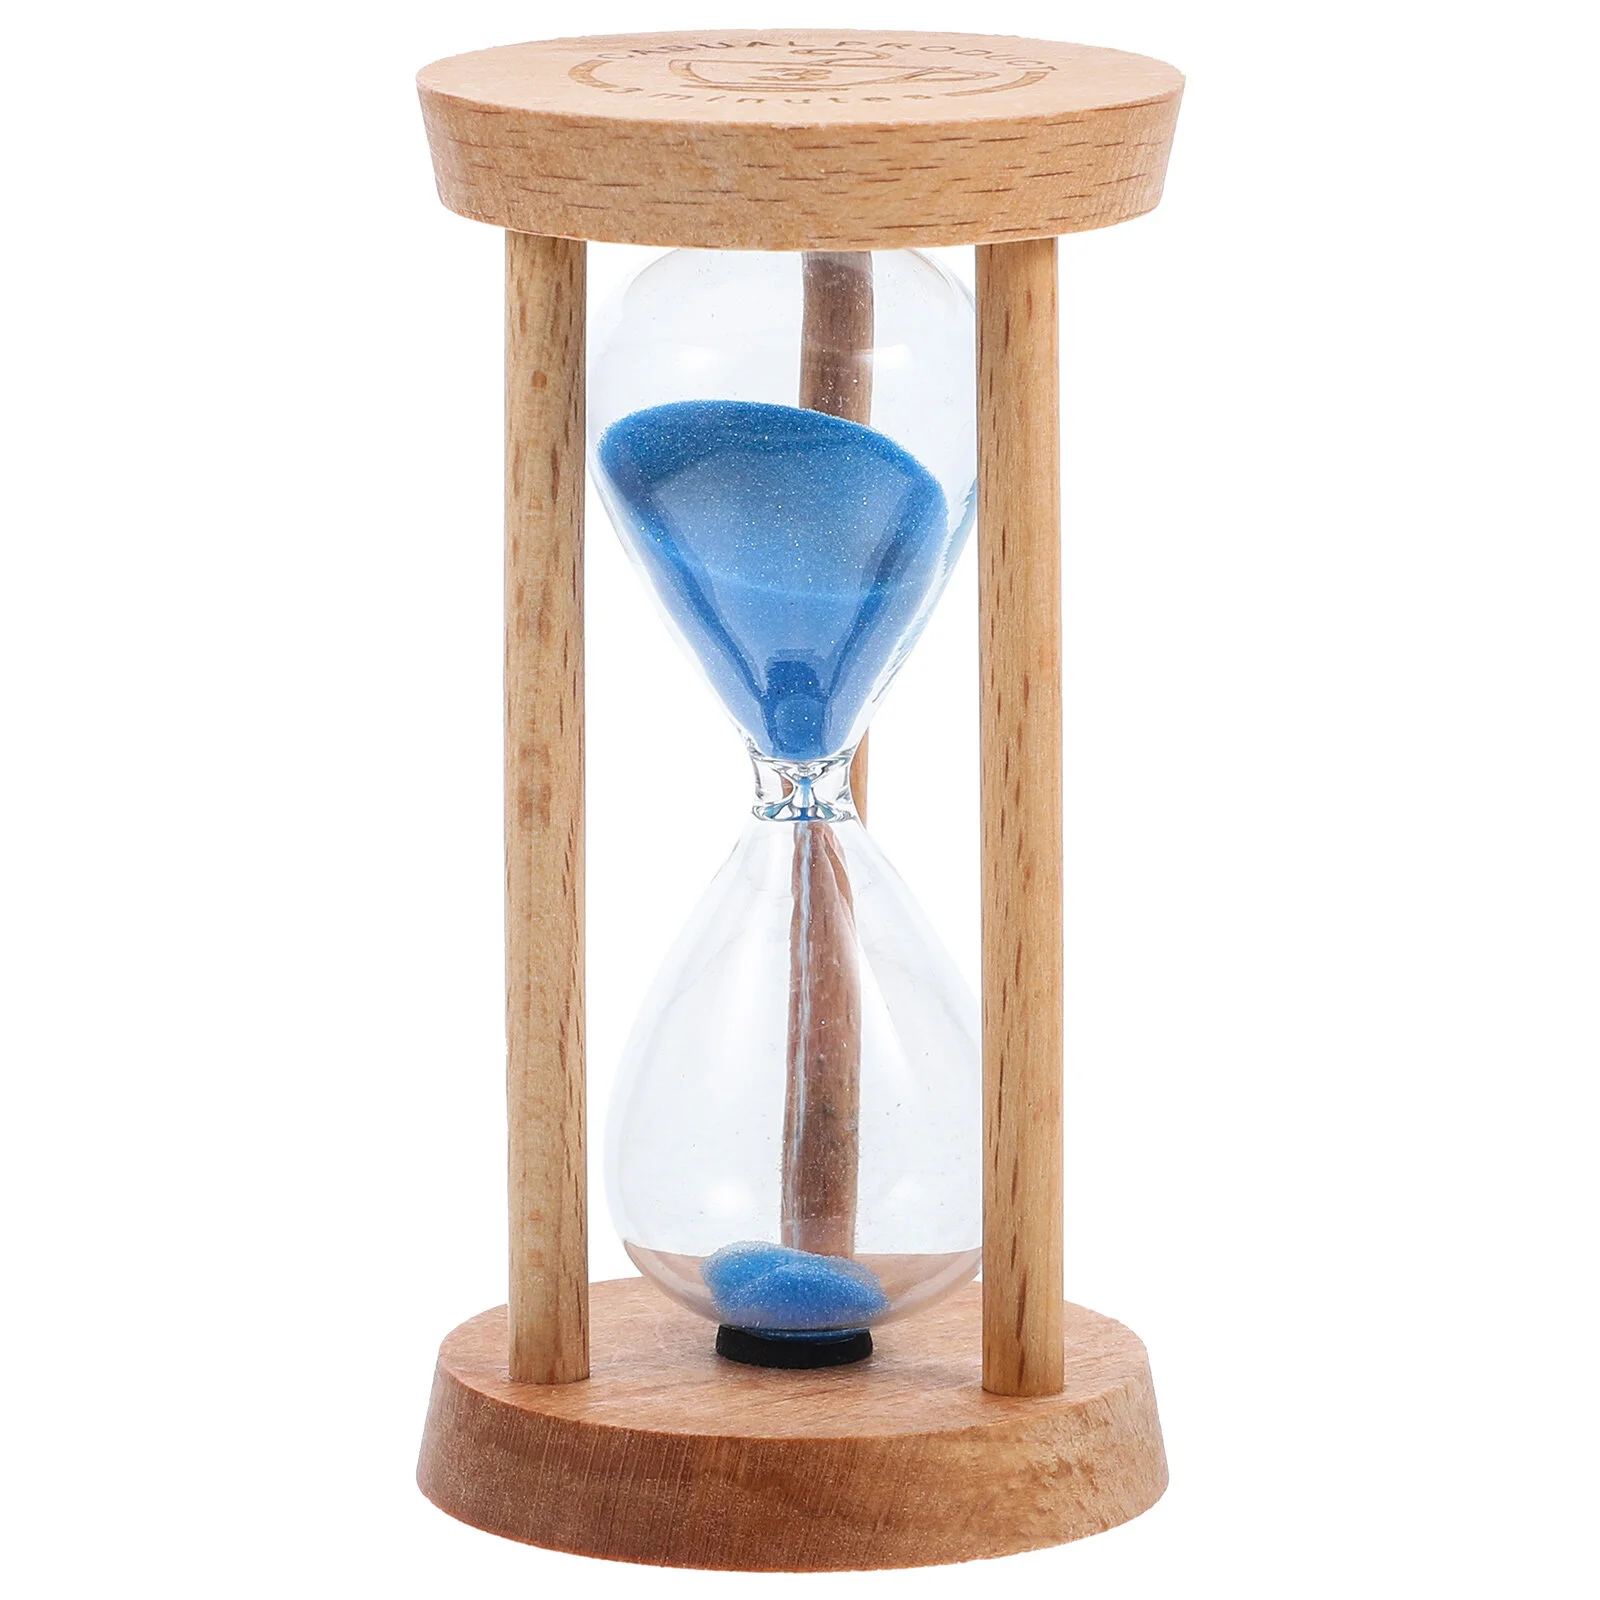 

Timer Present Accessory Tabletop Sand Household Hourglass Desktop Decor Dining Home Decoration Supply Wood Child Decorations